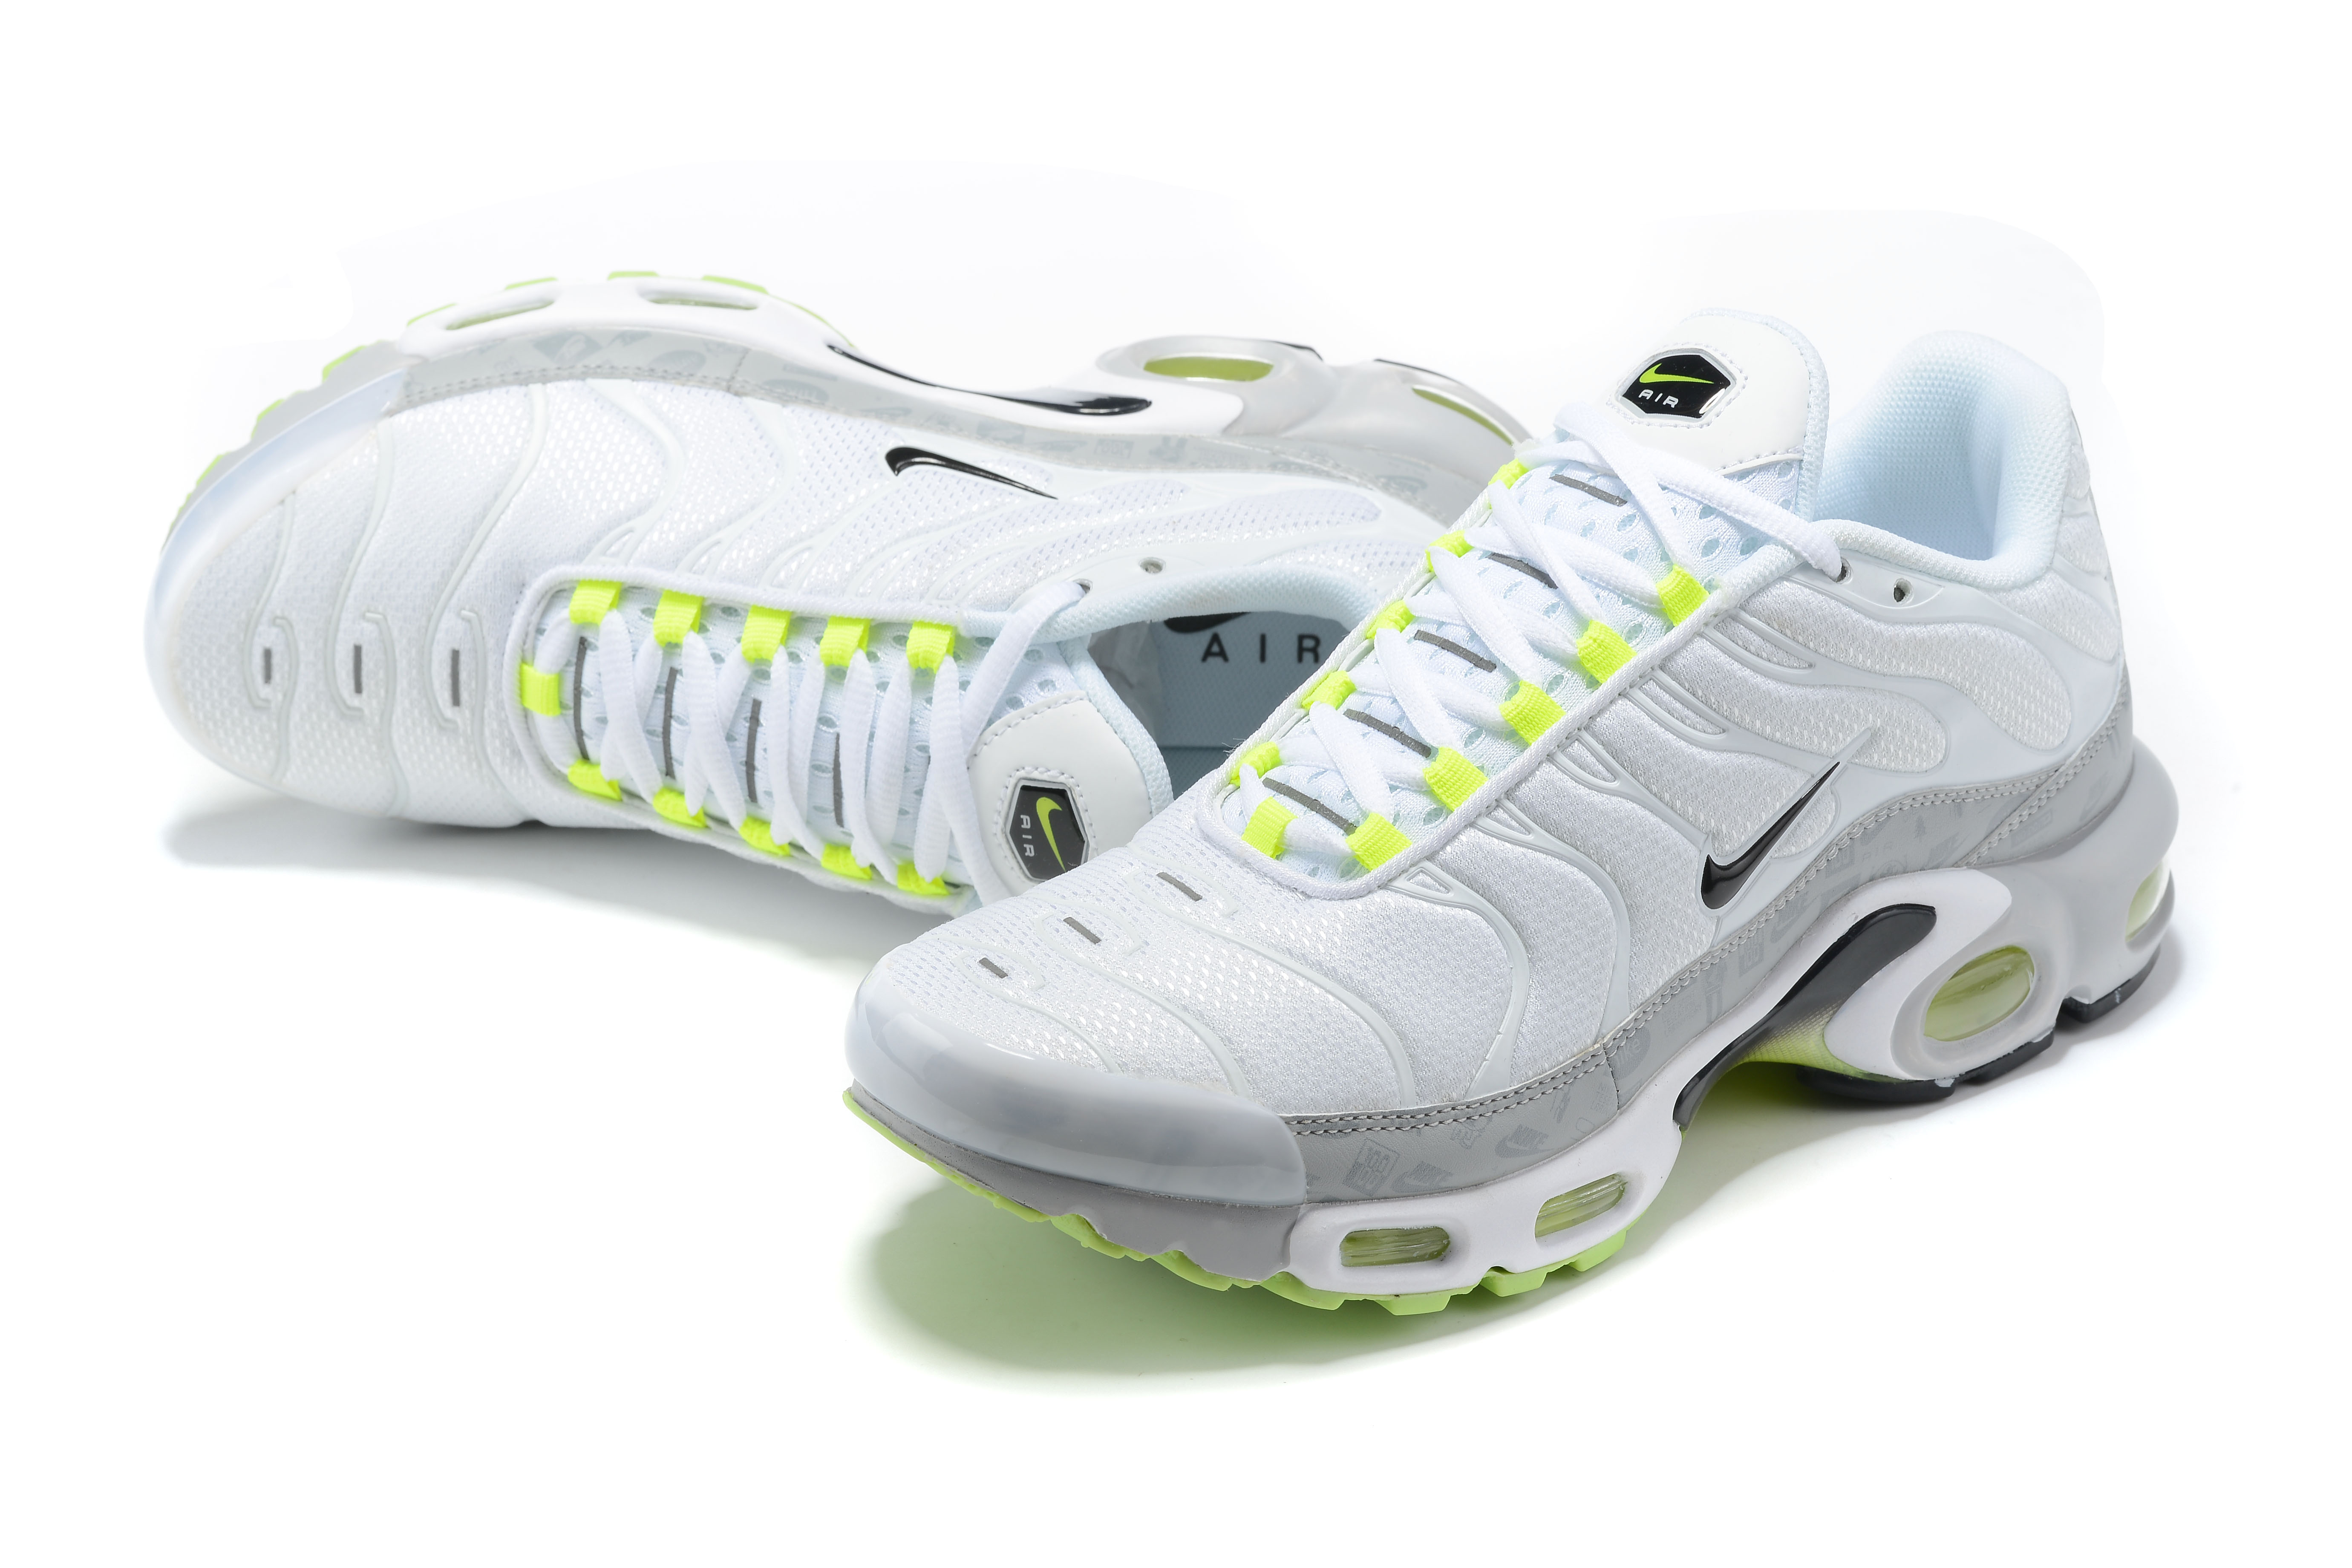 New Nike Air Max Plus White Fluorscent Grey Shoes